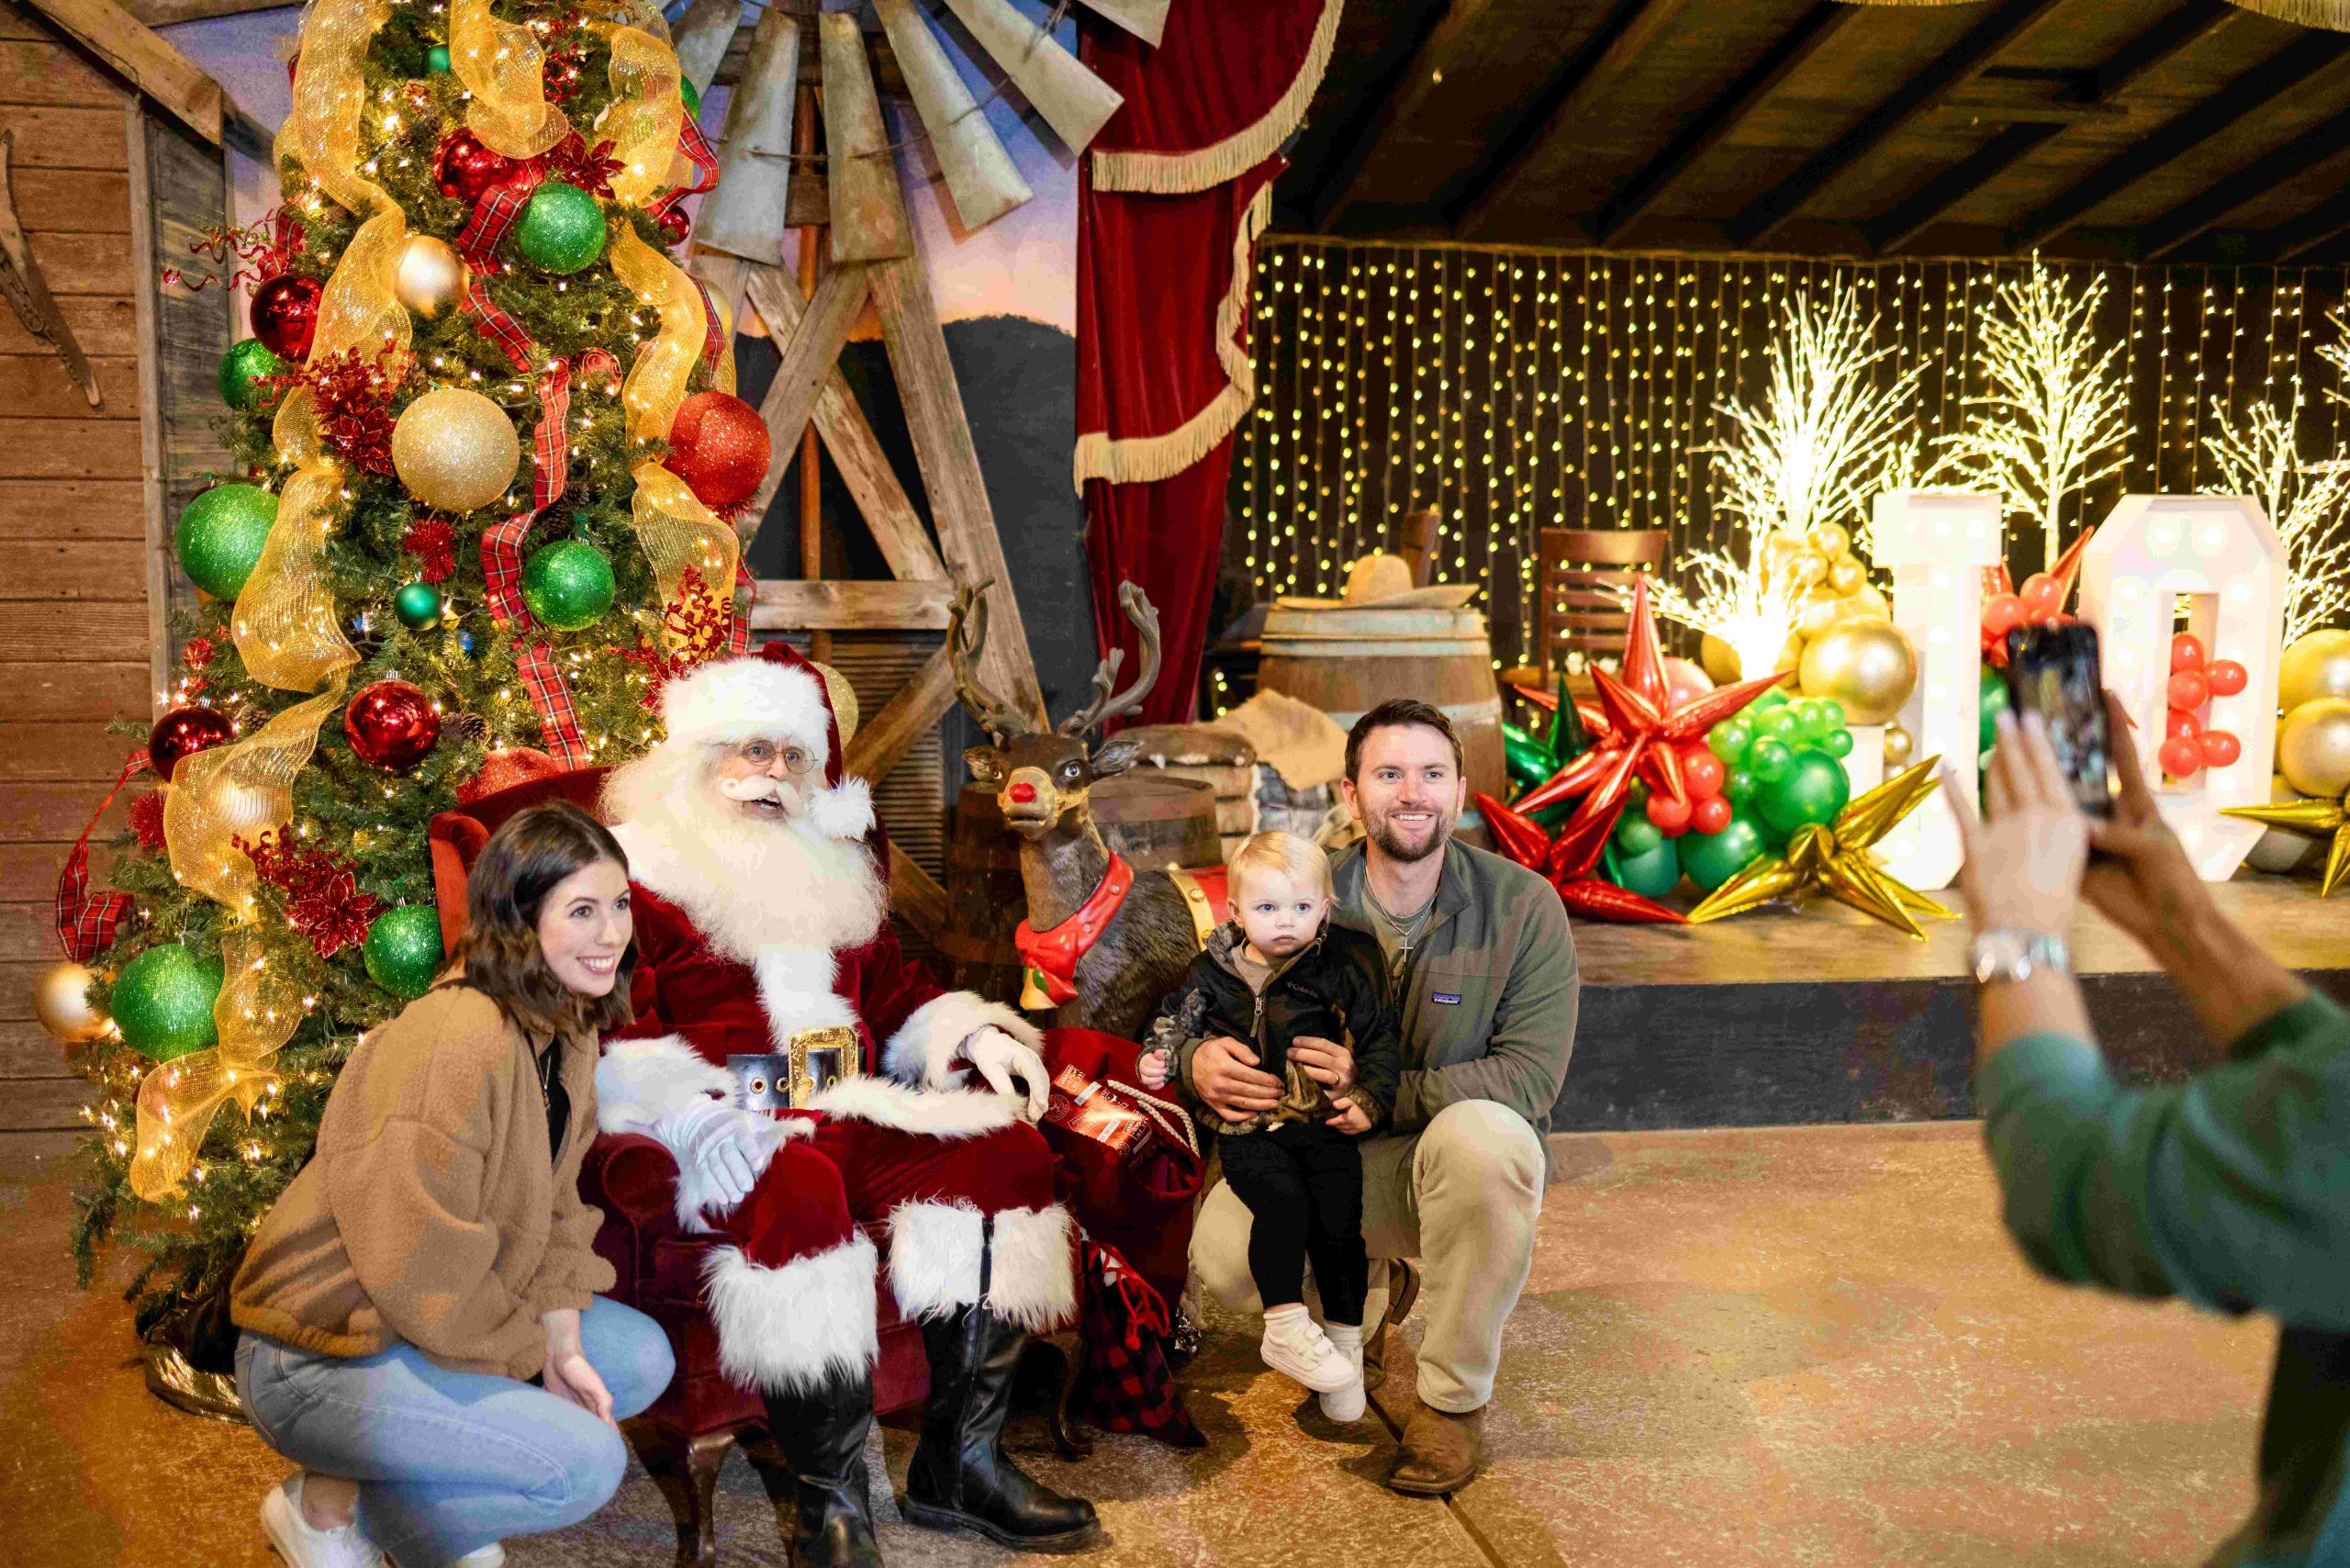 Family Photos with Santa Claus at Old West Christmas Light Fest